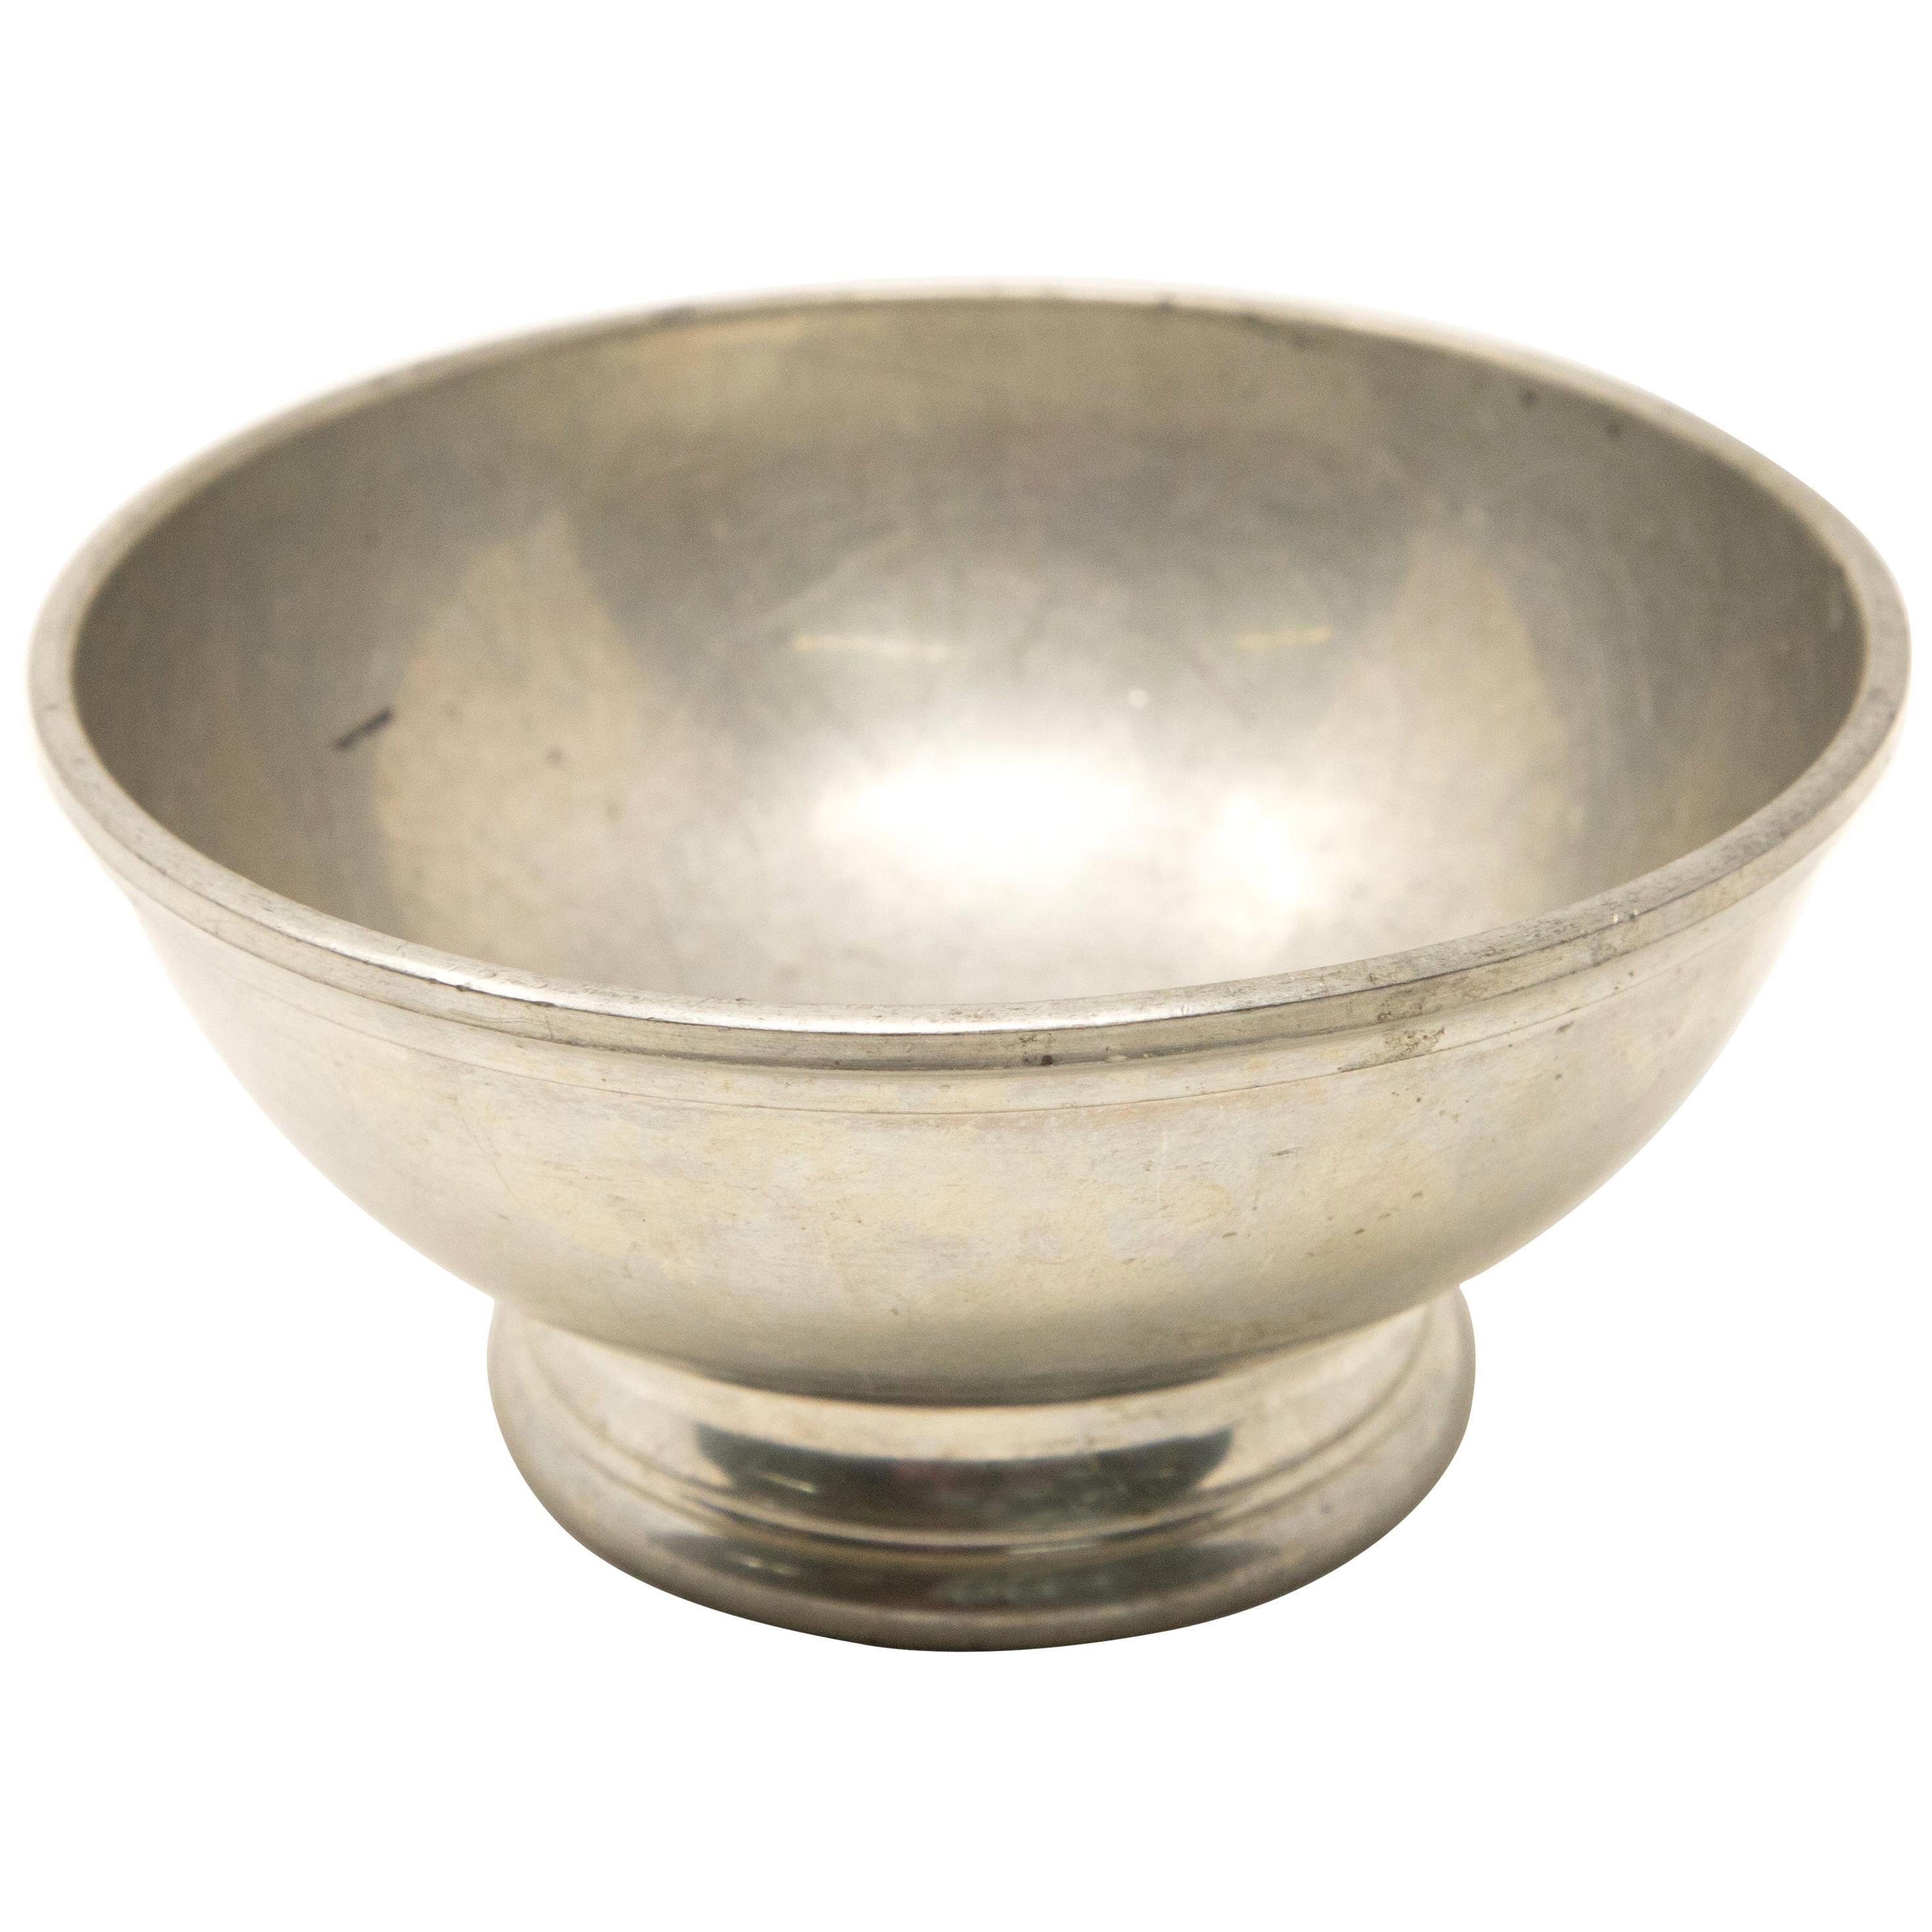 Williamsburg Stieff Pewter Bowl For Sale